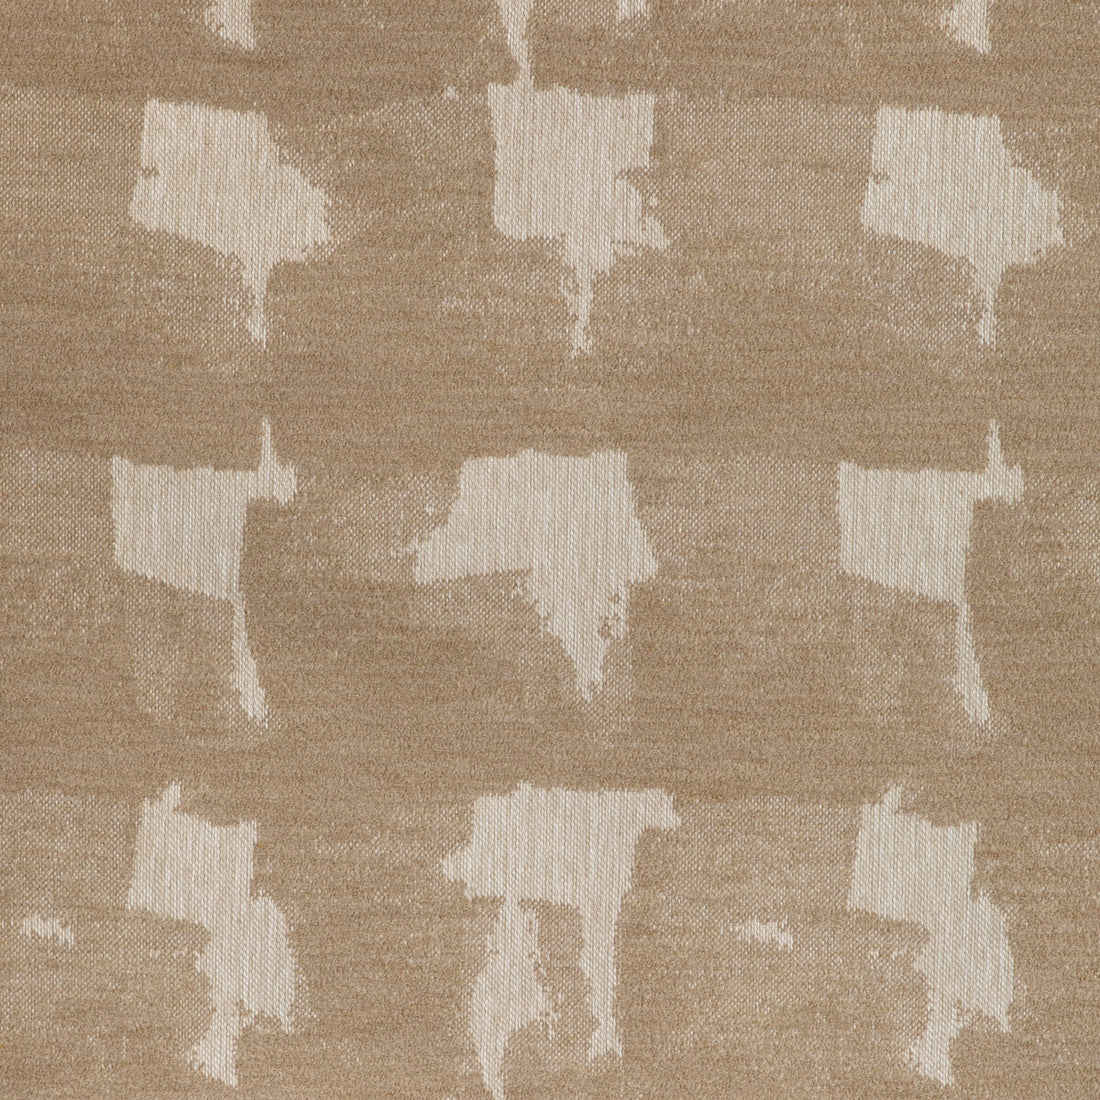 Les Falaises Weave fabric in linen color - pattern 8024118.16.0 - by Brunschwig &amp; Fils in the Les Ensembliers L&